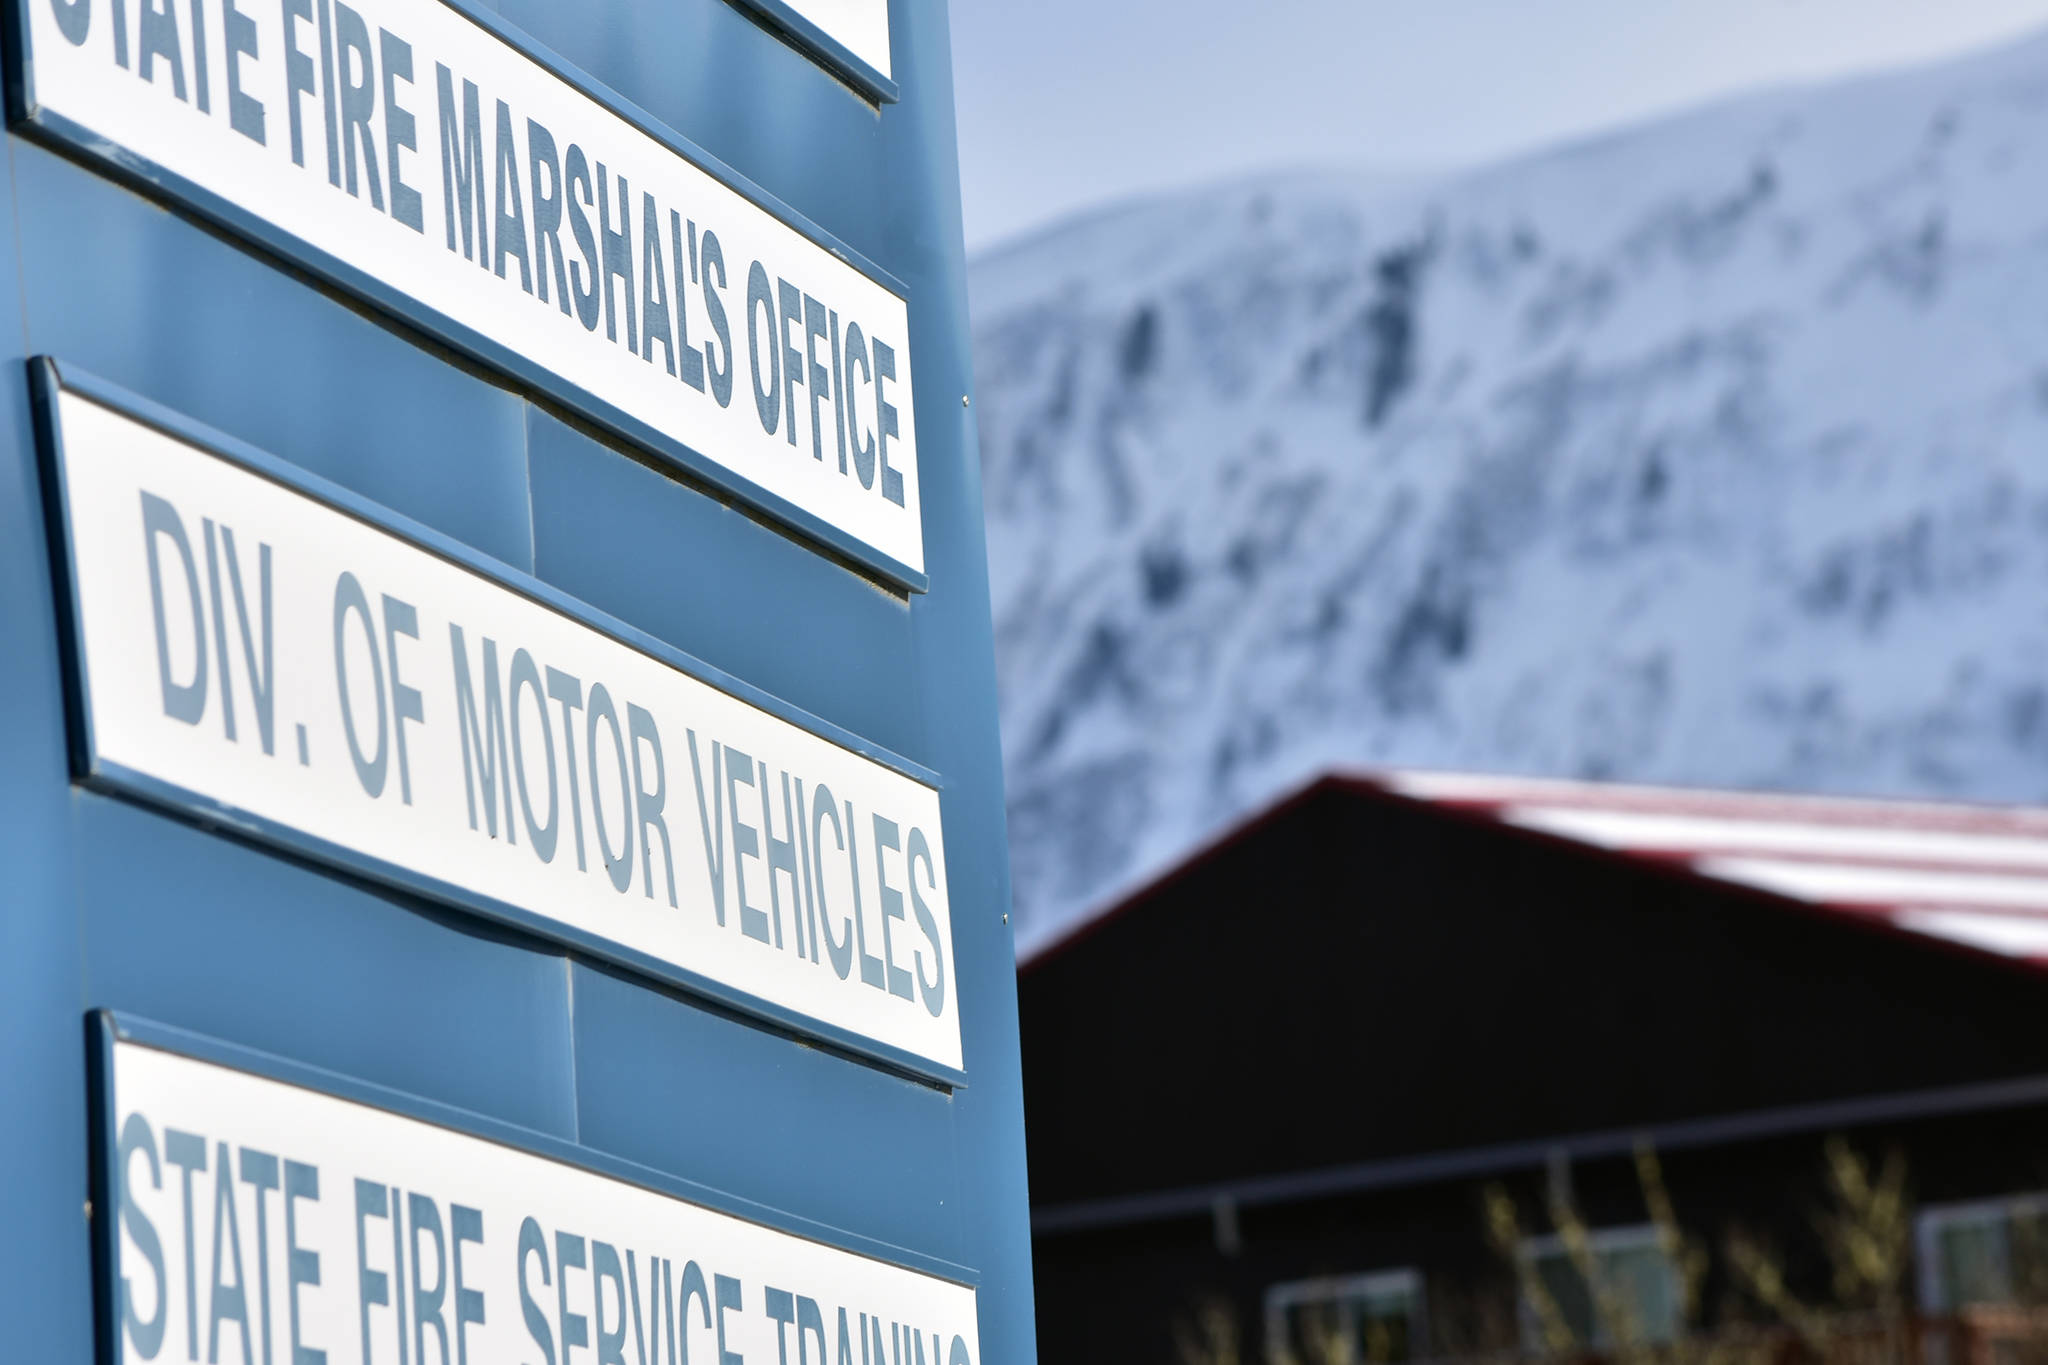 The sign for the Department of Motor Vehicles in Juneau on March 18, 2021. Had a proposal to close six rural DMVs gone through, Juneau woud be the closest DMV for residents in Haines, who aren't able to drive there. (Peter Segall / Juneau Empire)